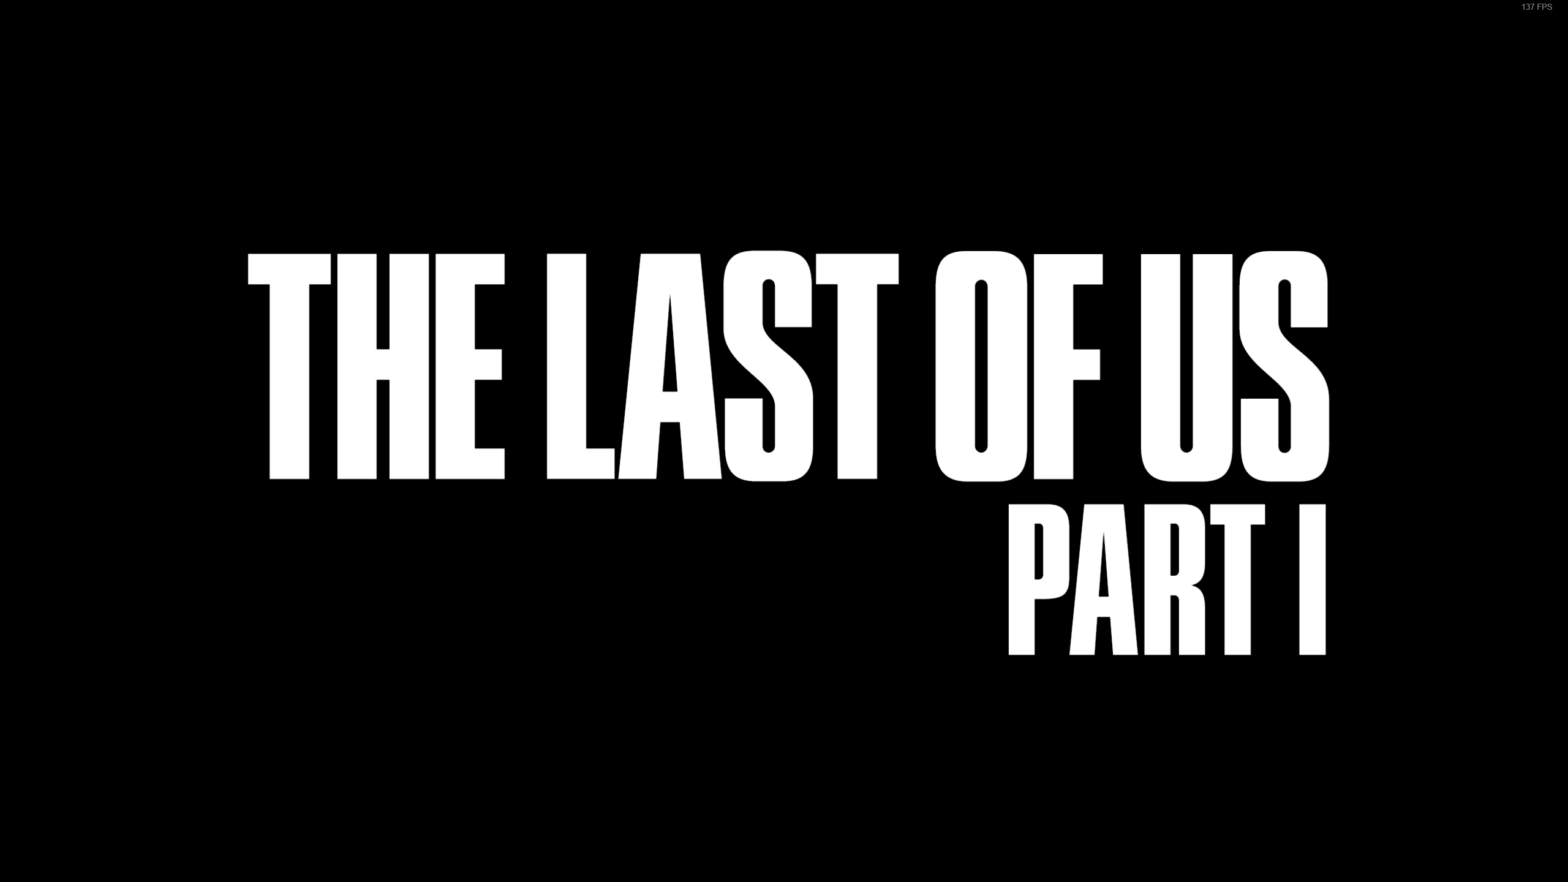 The Last of Us - Part 1 PC review: For the 1%